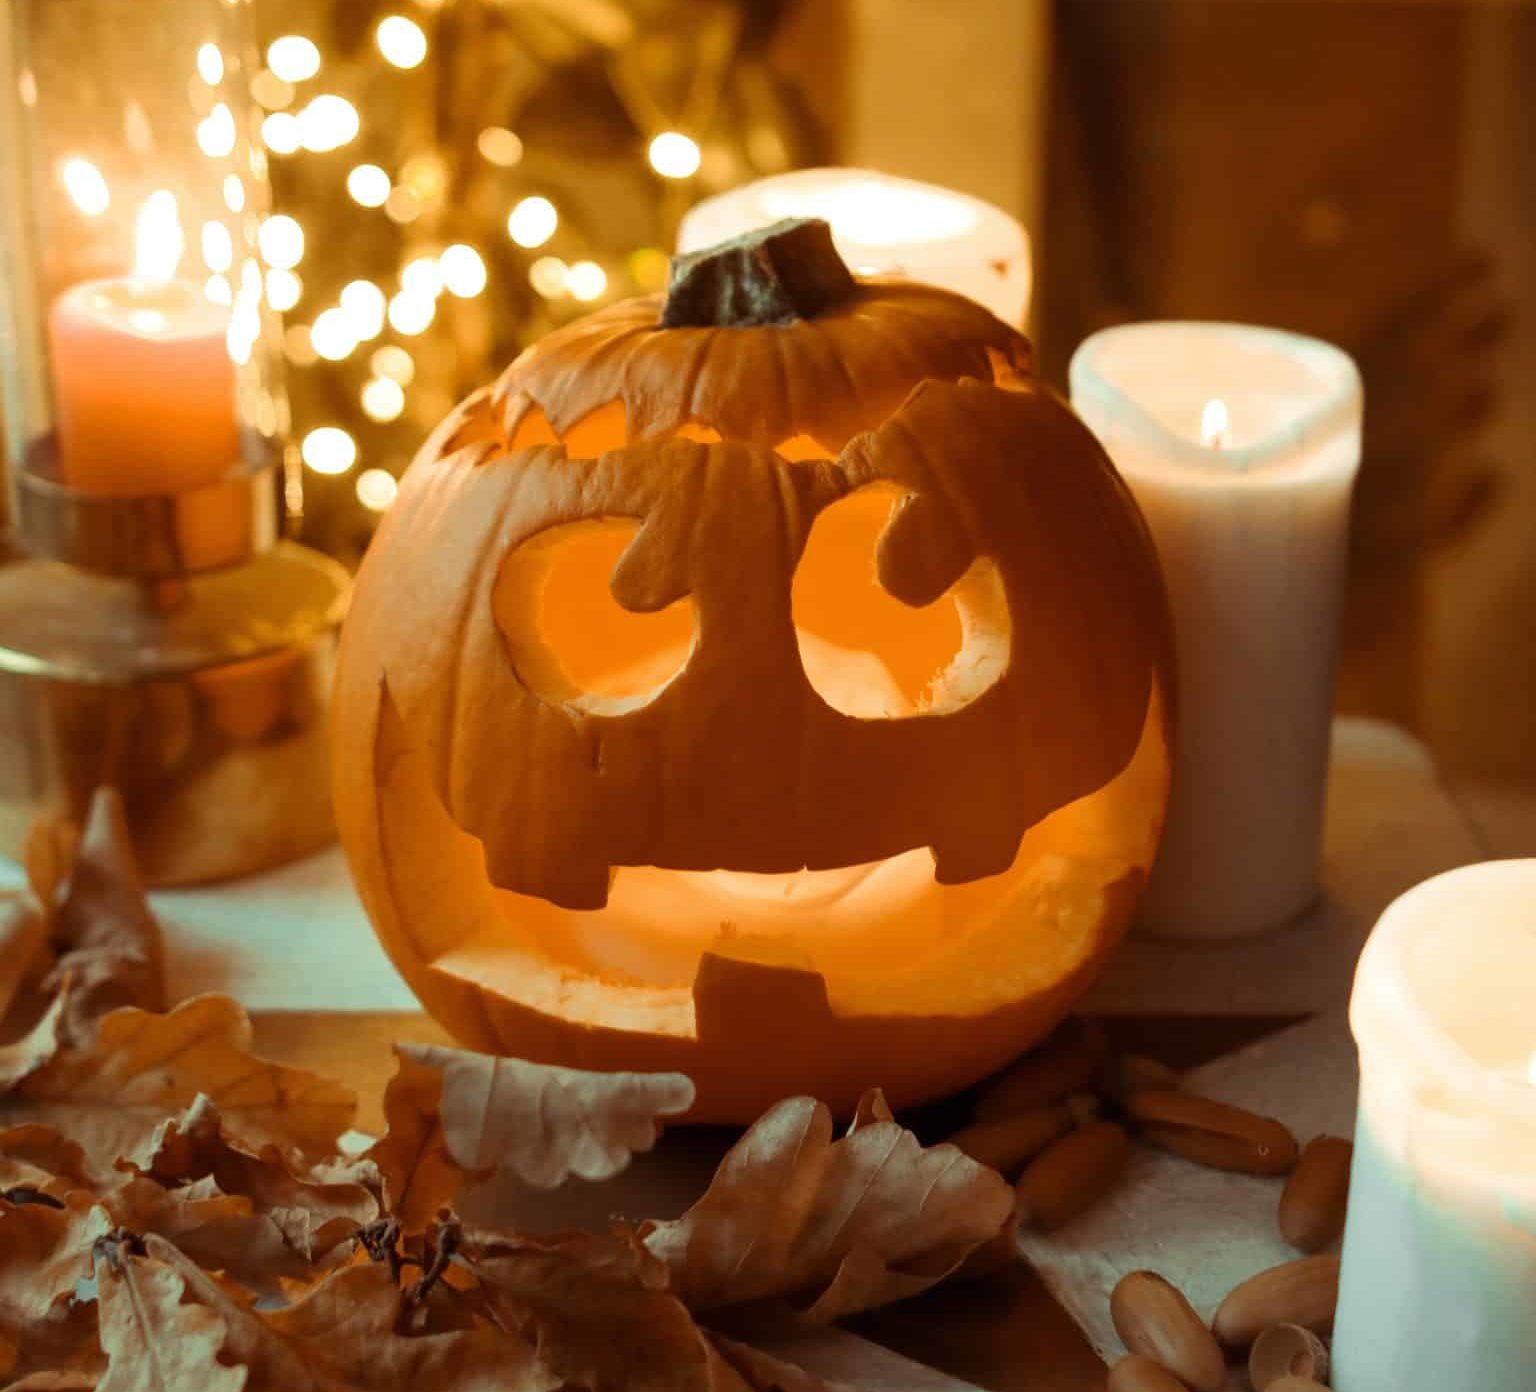 Carved Pumpkin surrounded by candles